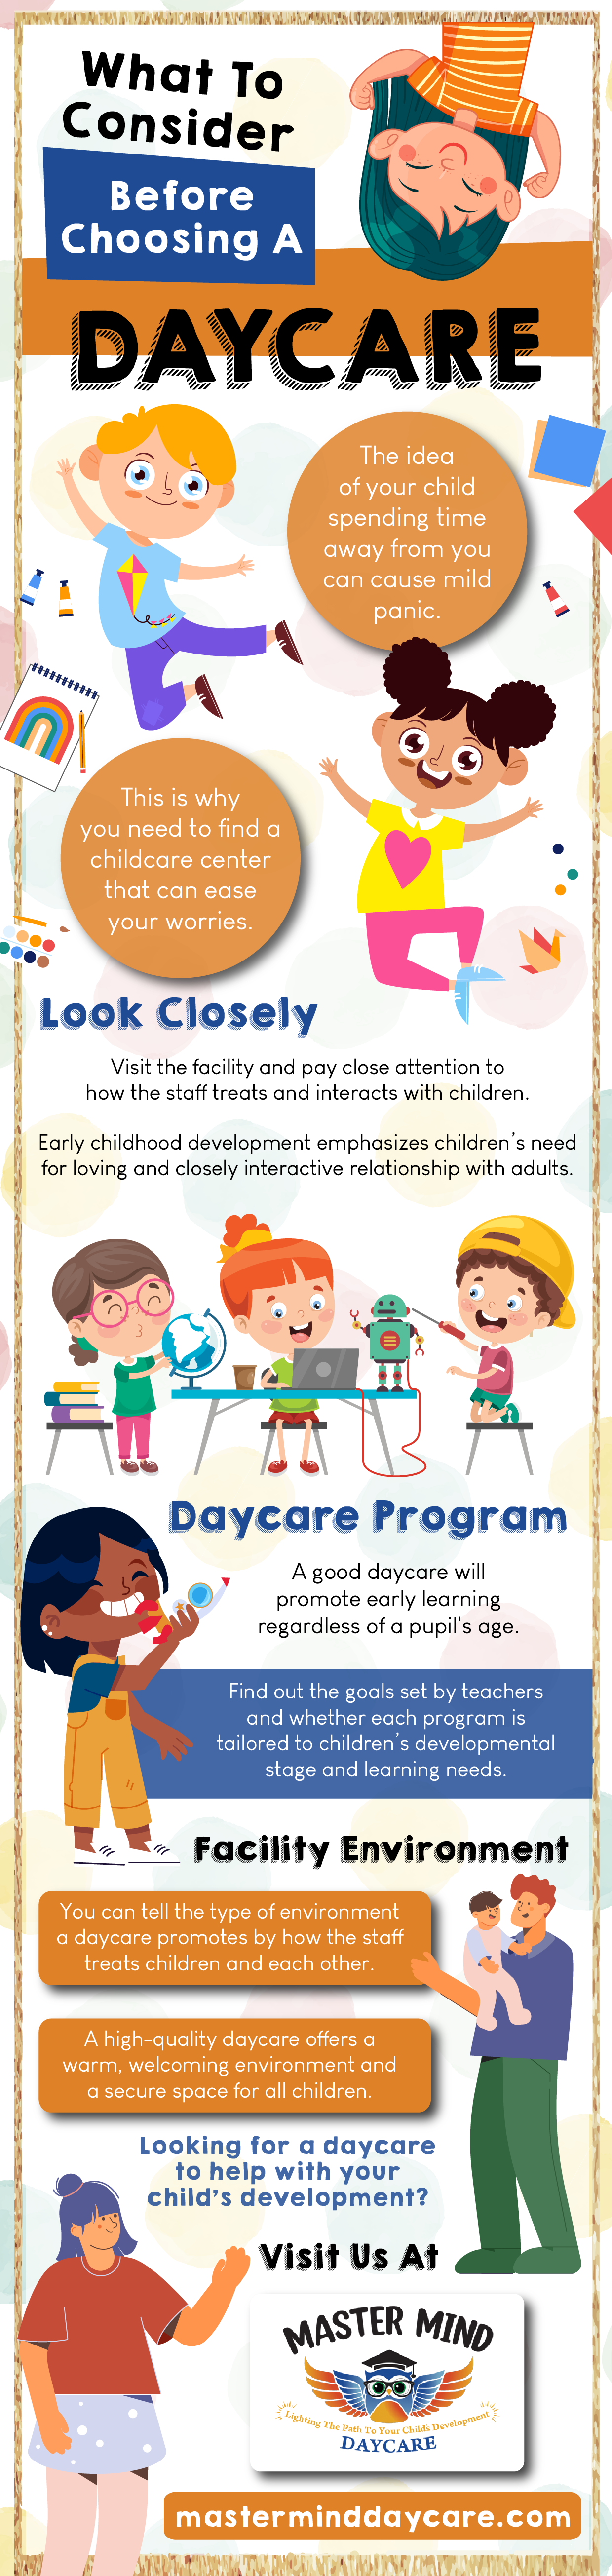 What to consider before choosing a daycare